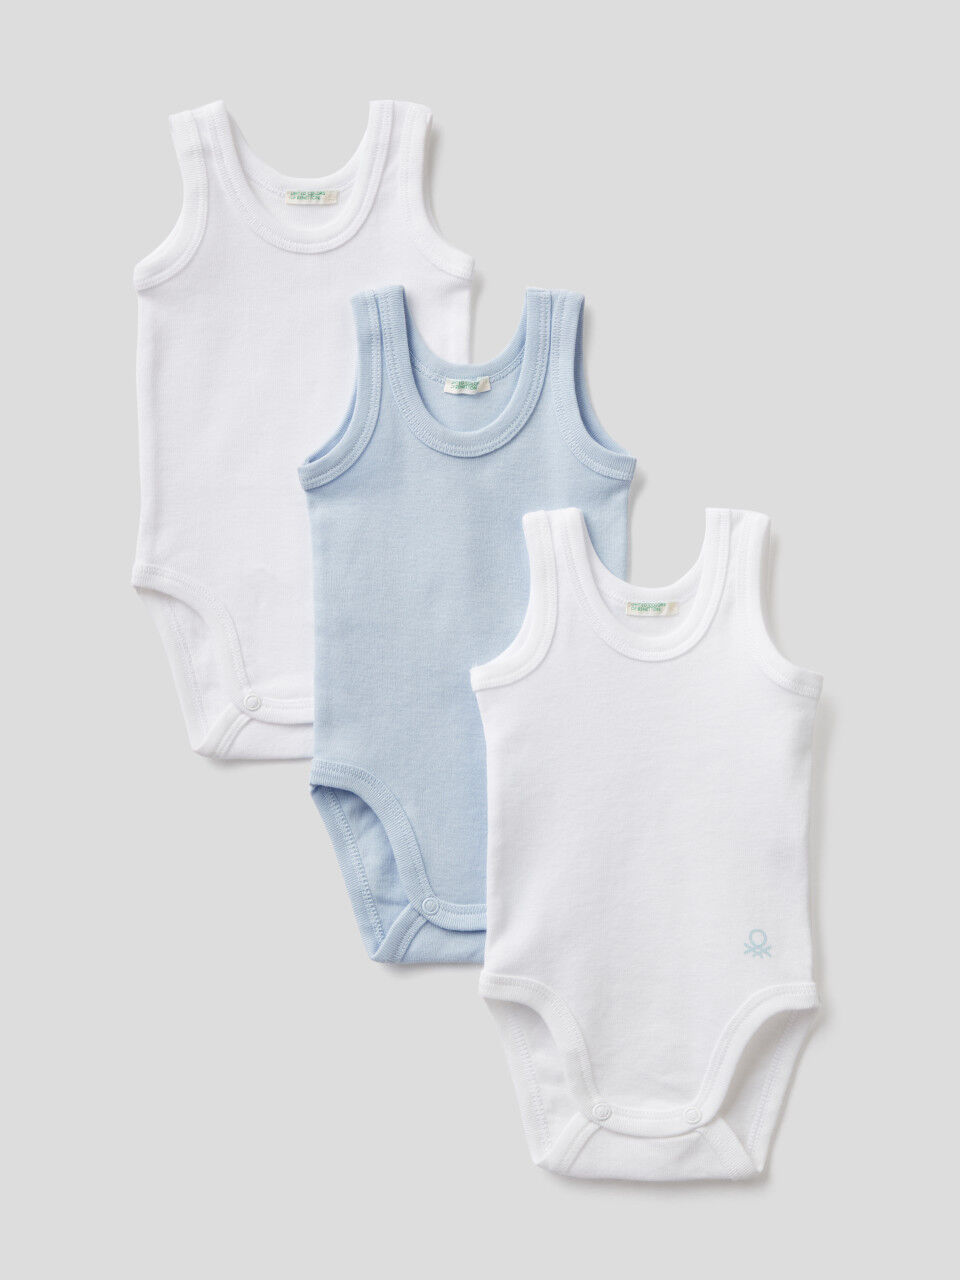 Three solid color tank top bodysuits